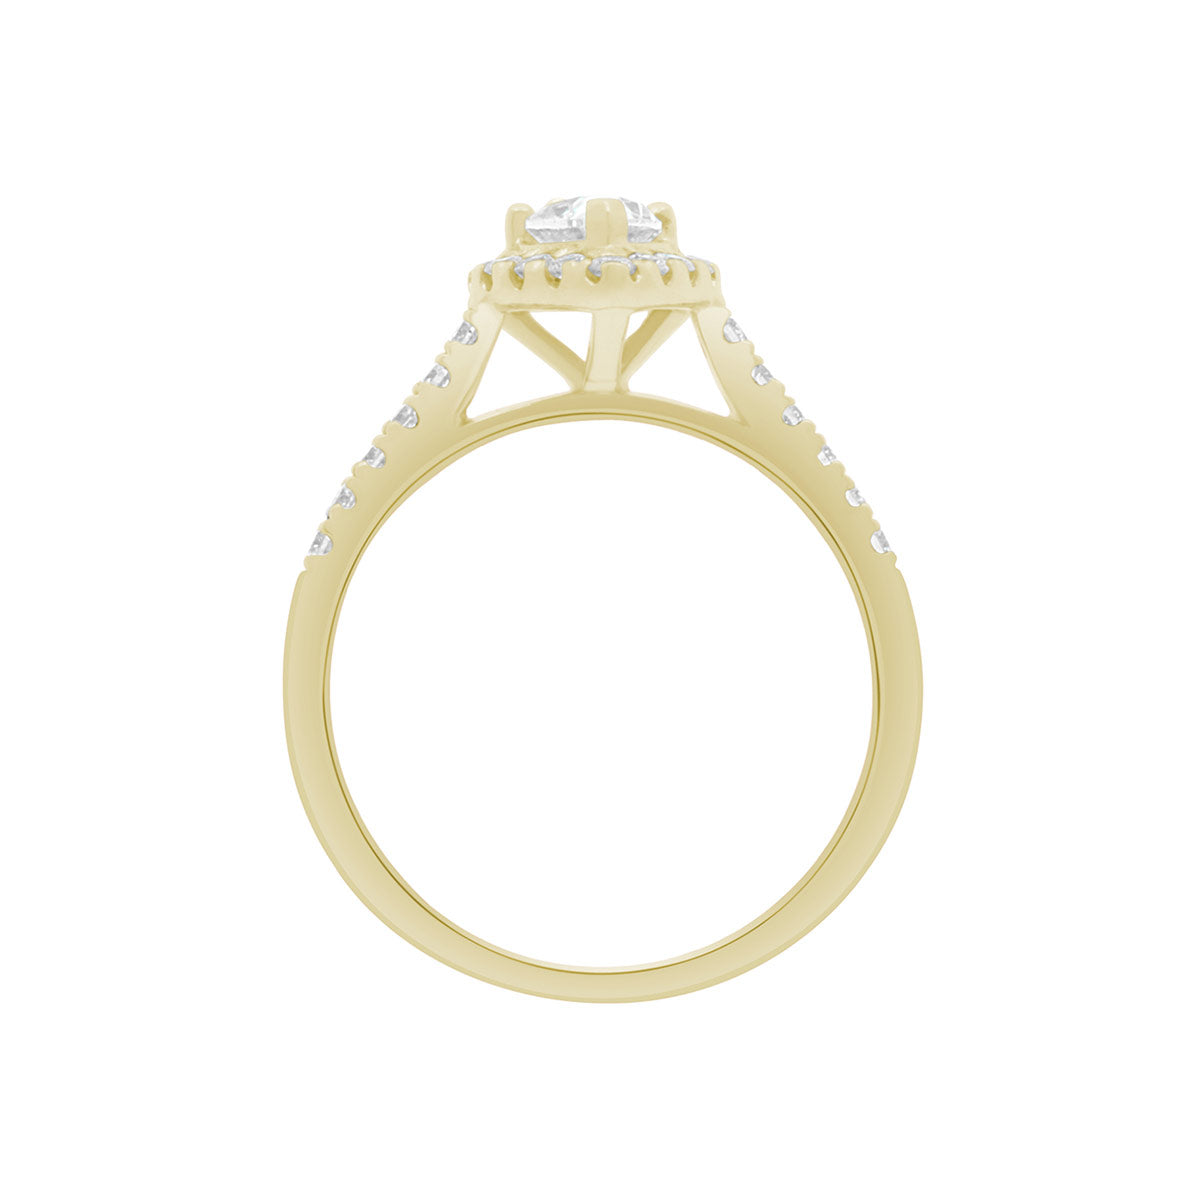 Pear Cut Halo Ring in yellow gold, standing upright on A WHITE SURFACE WITH A WHITE BACKGROUND